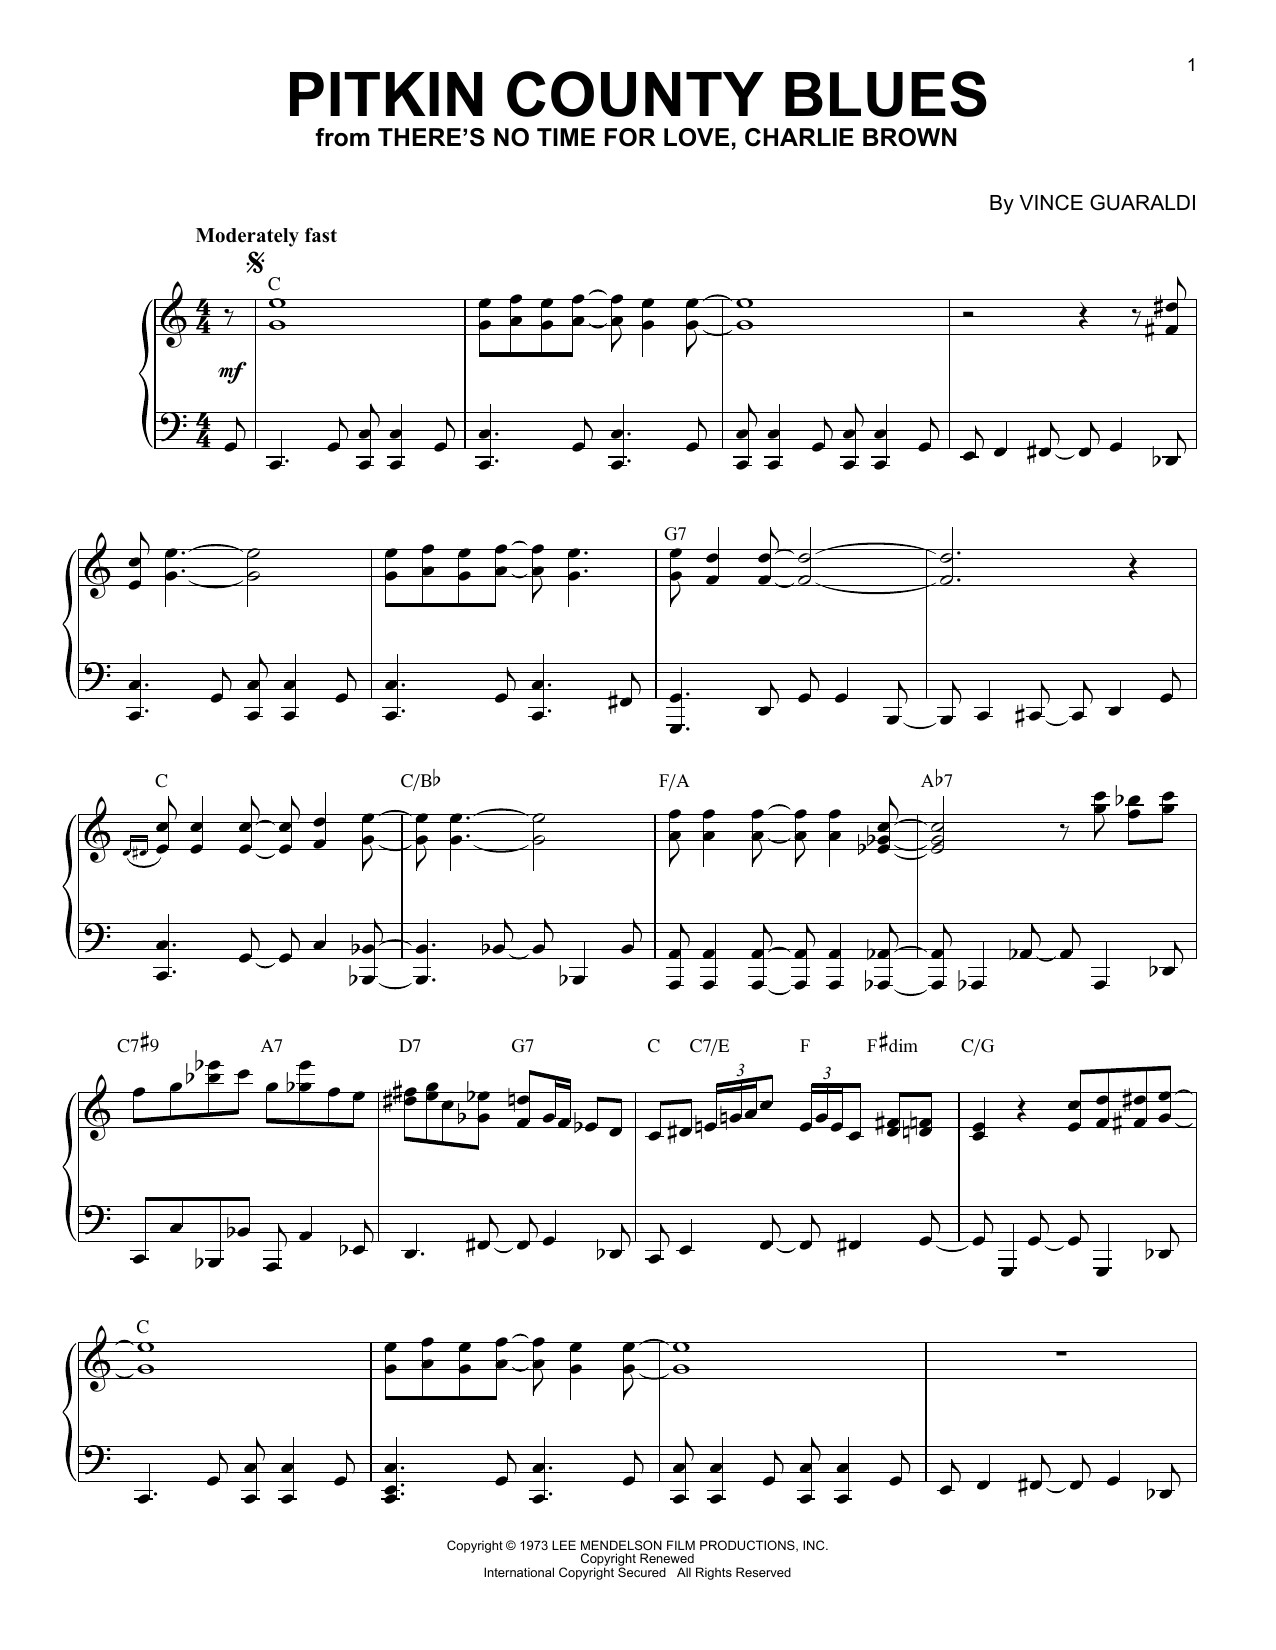 Download Vince Guaraldi Pitkin Country Blues Sheet Music